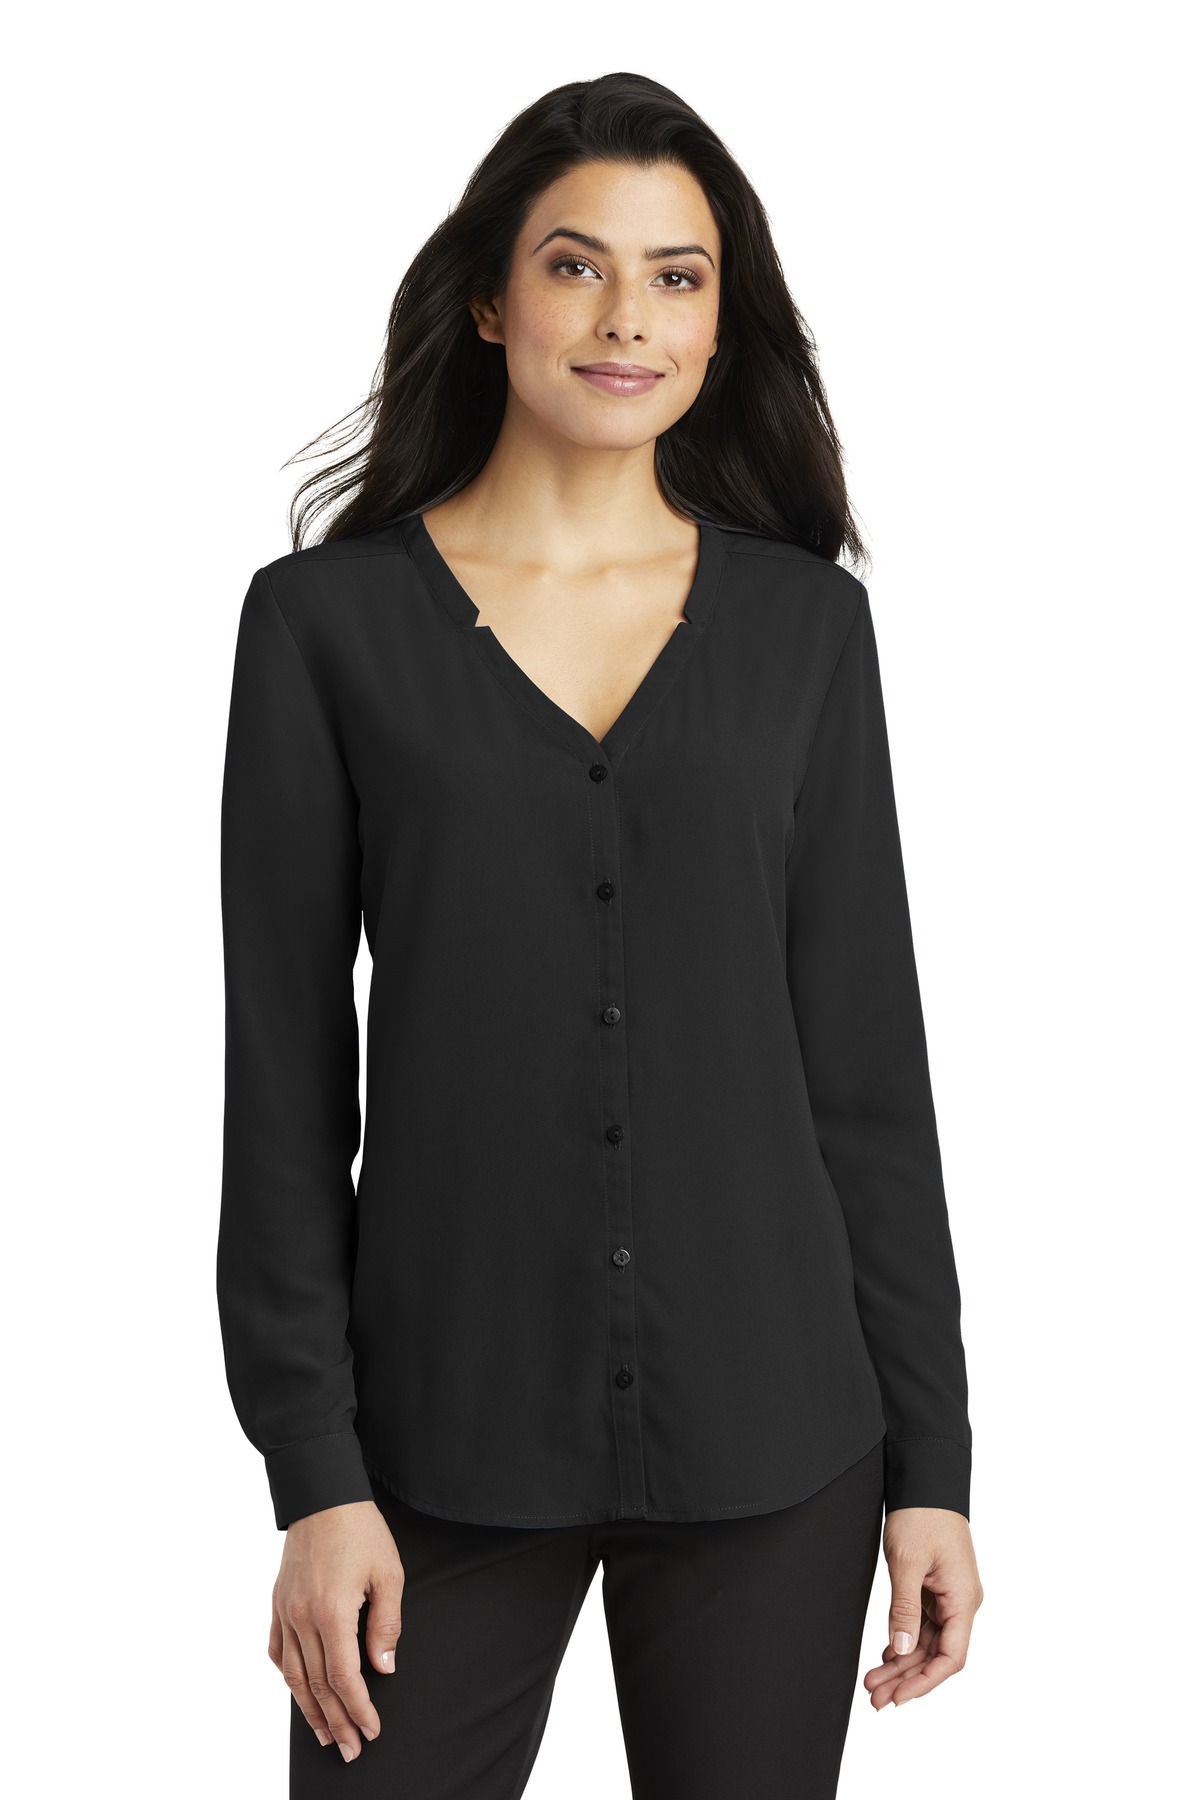 Port Authority Ladies Woven Shirts for Hospitality- ® Ladies Long Sleeve Button-Front Blouse.-Port Authority